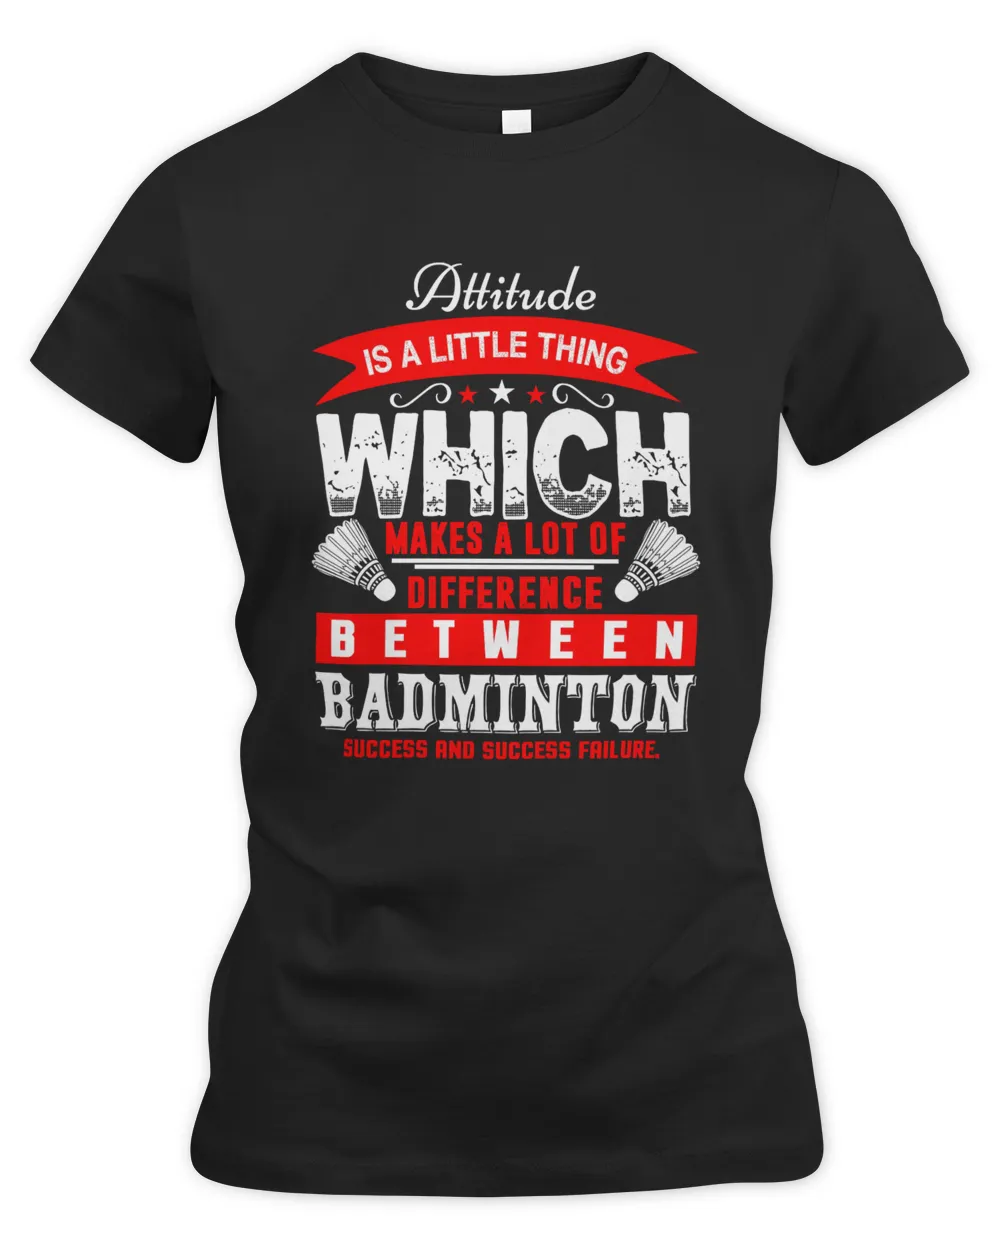 Attitude IS A LITTLE THINGWHICHMAKES A LOT OFDIFFERENCEBETWEENBADMINTONSUCCESS AND SUCCESS FAILURE Shirt, Badminton Shirt,Badminton T-shirt,Funny Badminton Shirt, Badminton Gift,Sport Shir